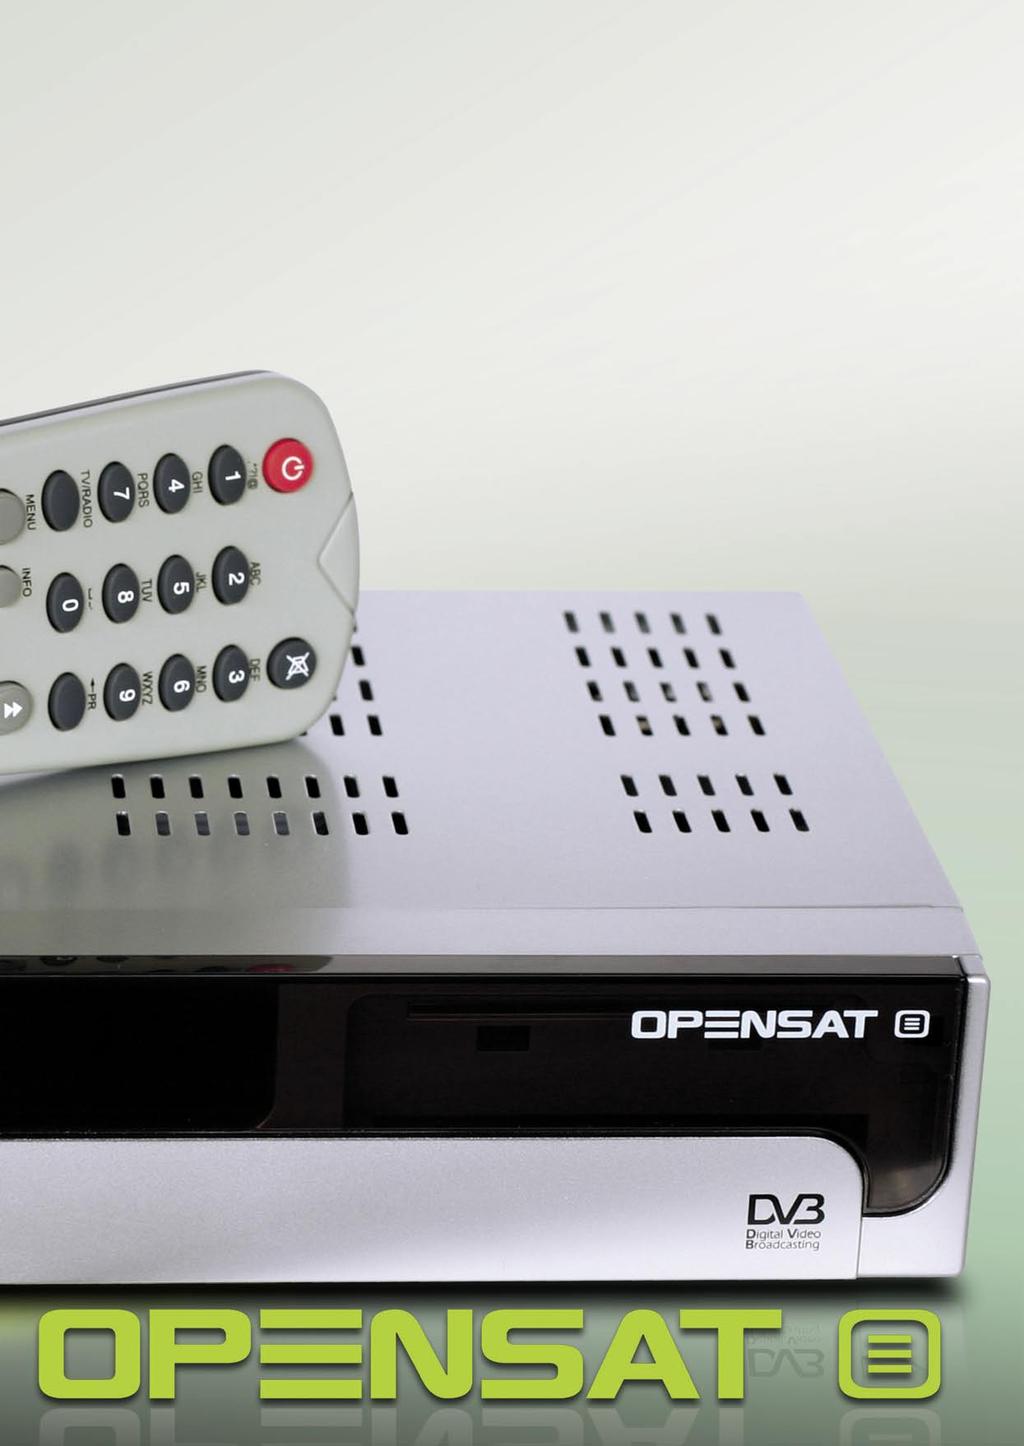 If you open this flap it reveals seven buttons to operate the receiver without remote control, a CI slot for all standard modules like Irdeto, Seca, Viaccess, Cryptoworks or Nagravision, a Conax card